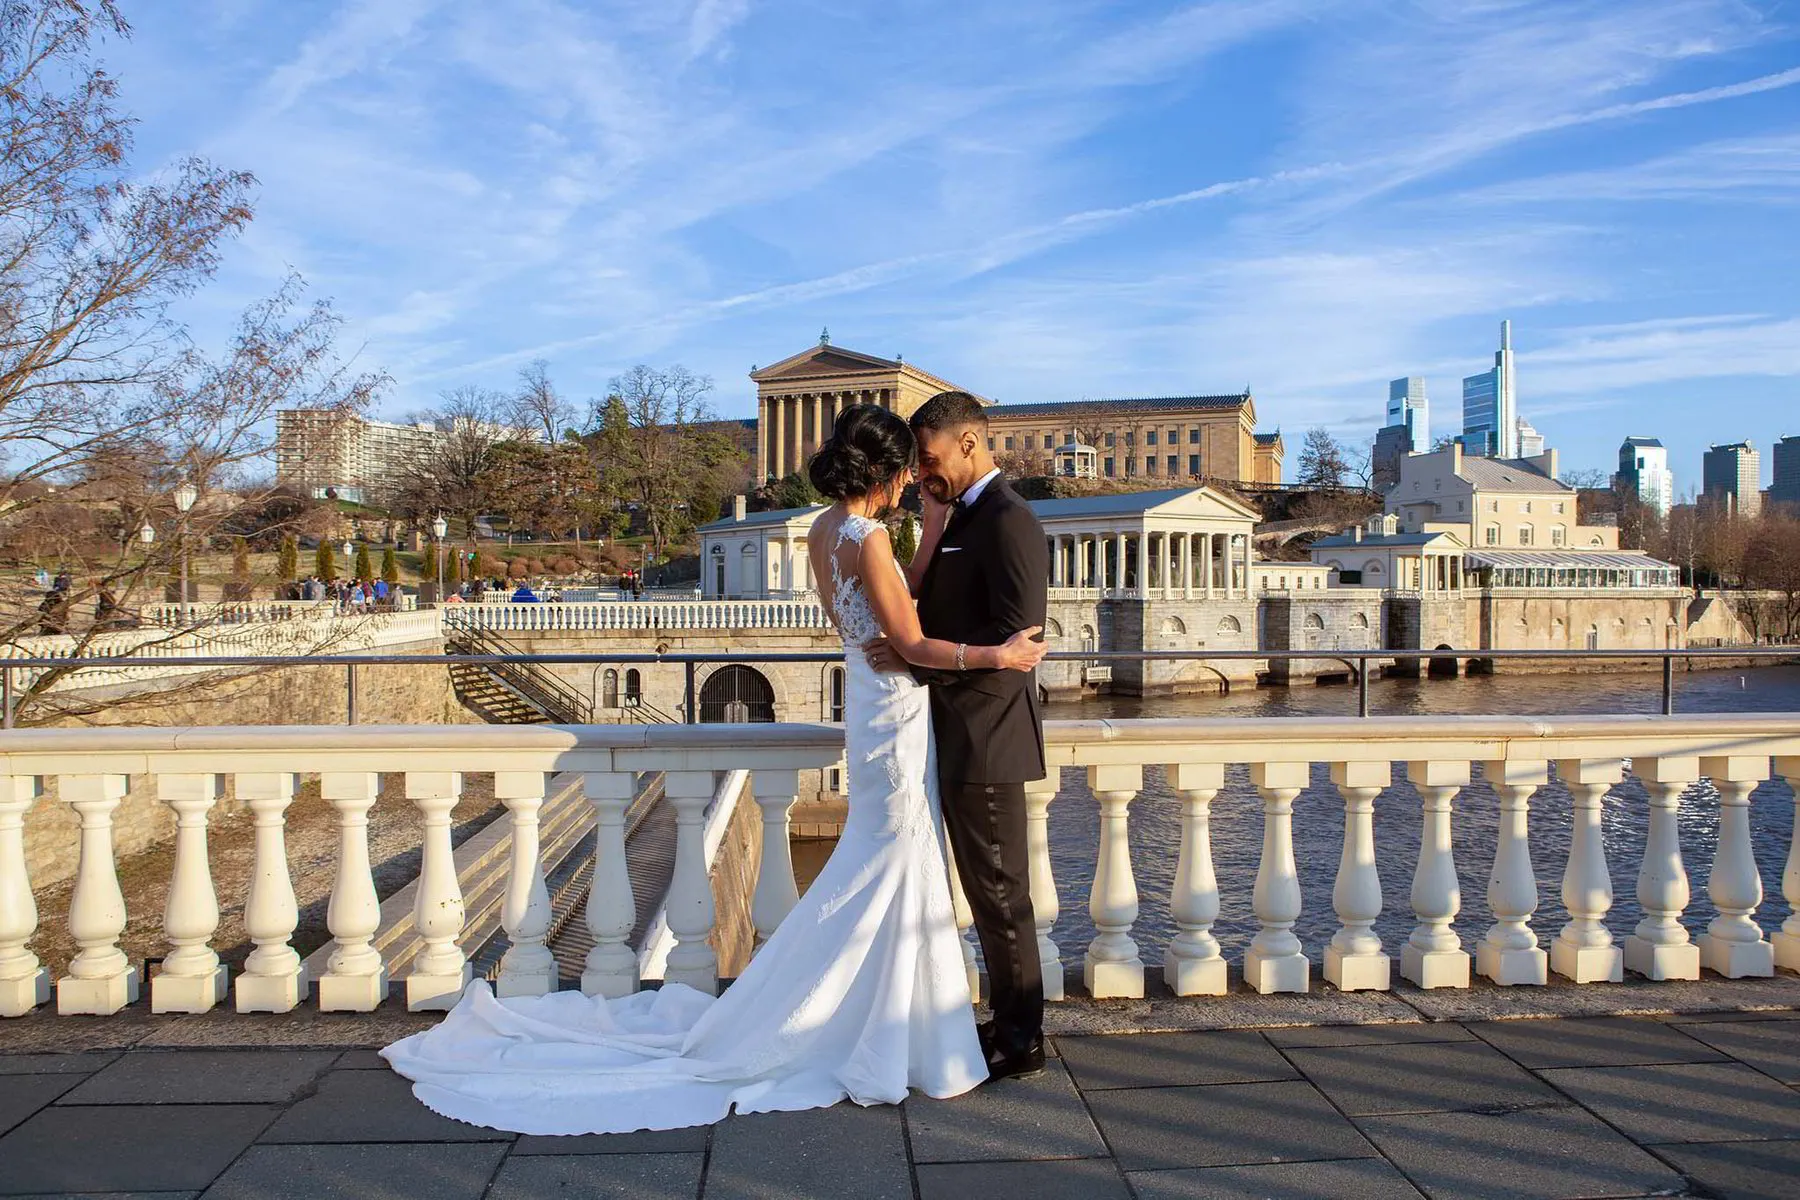 A Small Philly Wedding with So Much Love - Sunny &amp; Gina, Vaux Studio Wedding Chapel, Philadelphia, PA